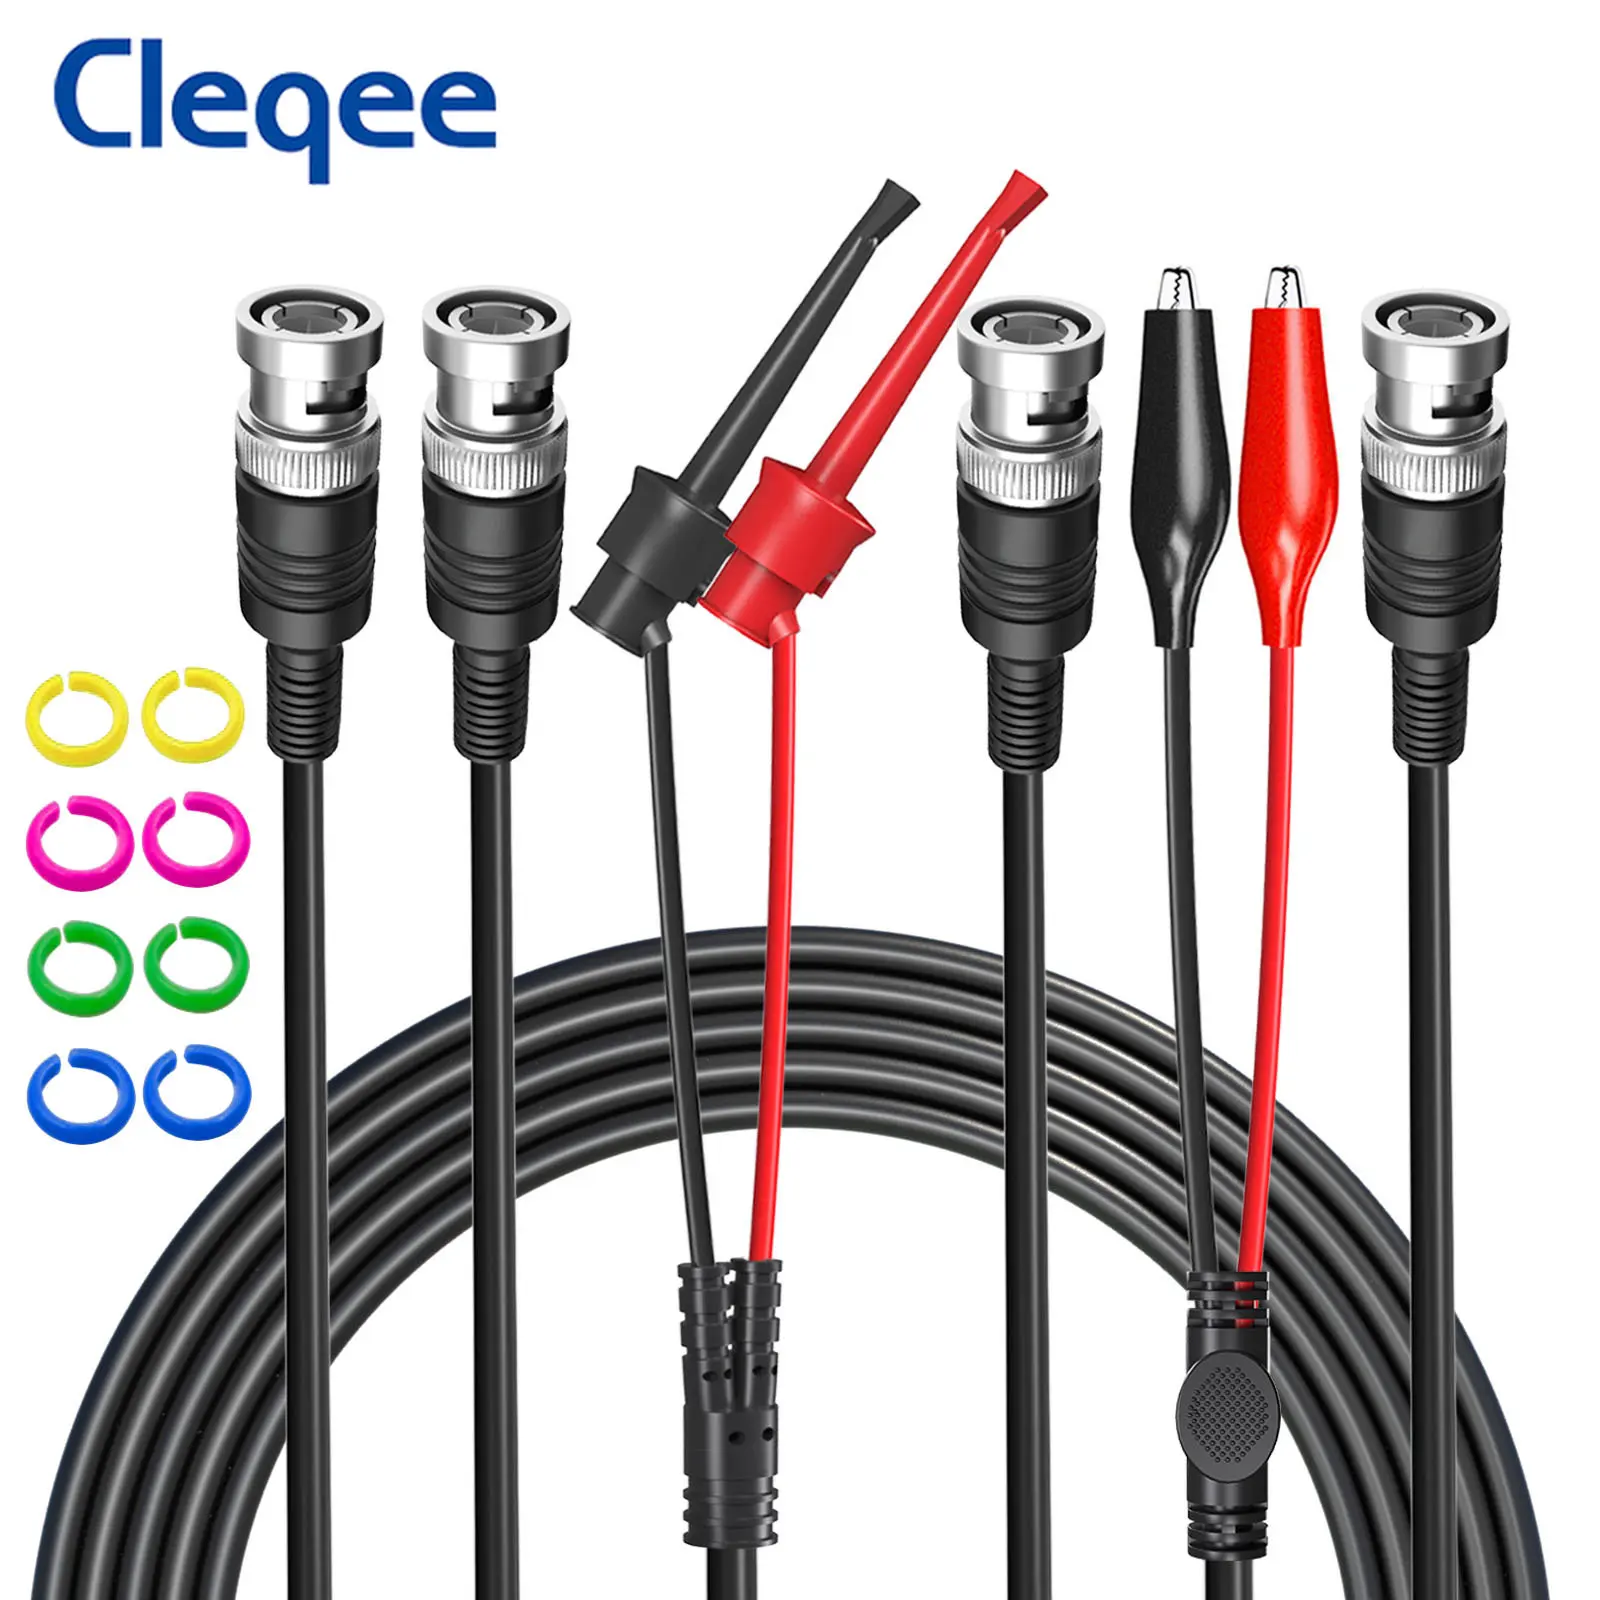 

Cleqee P1260 3pcs/set BNC Coaxial Cable Test Lead Kit BNC to BNC & Alligator Clips &Test Hook Clip Test Lead with Color Rings